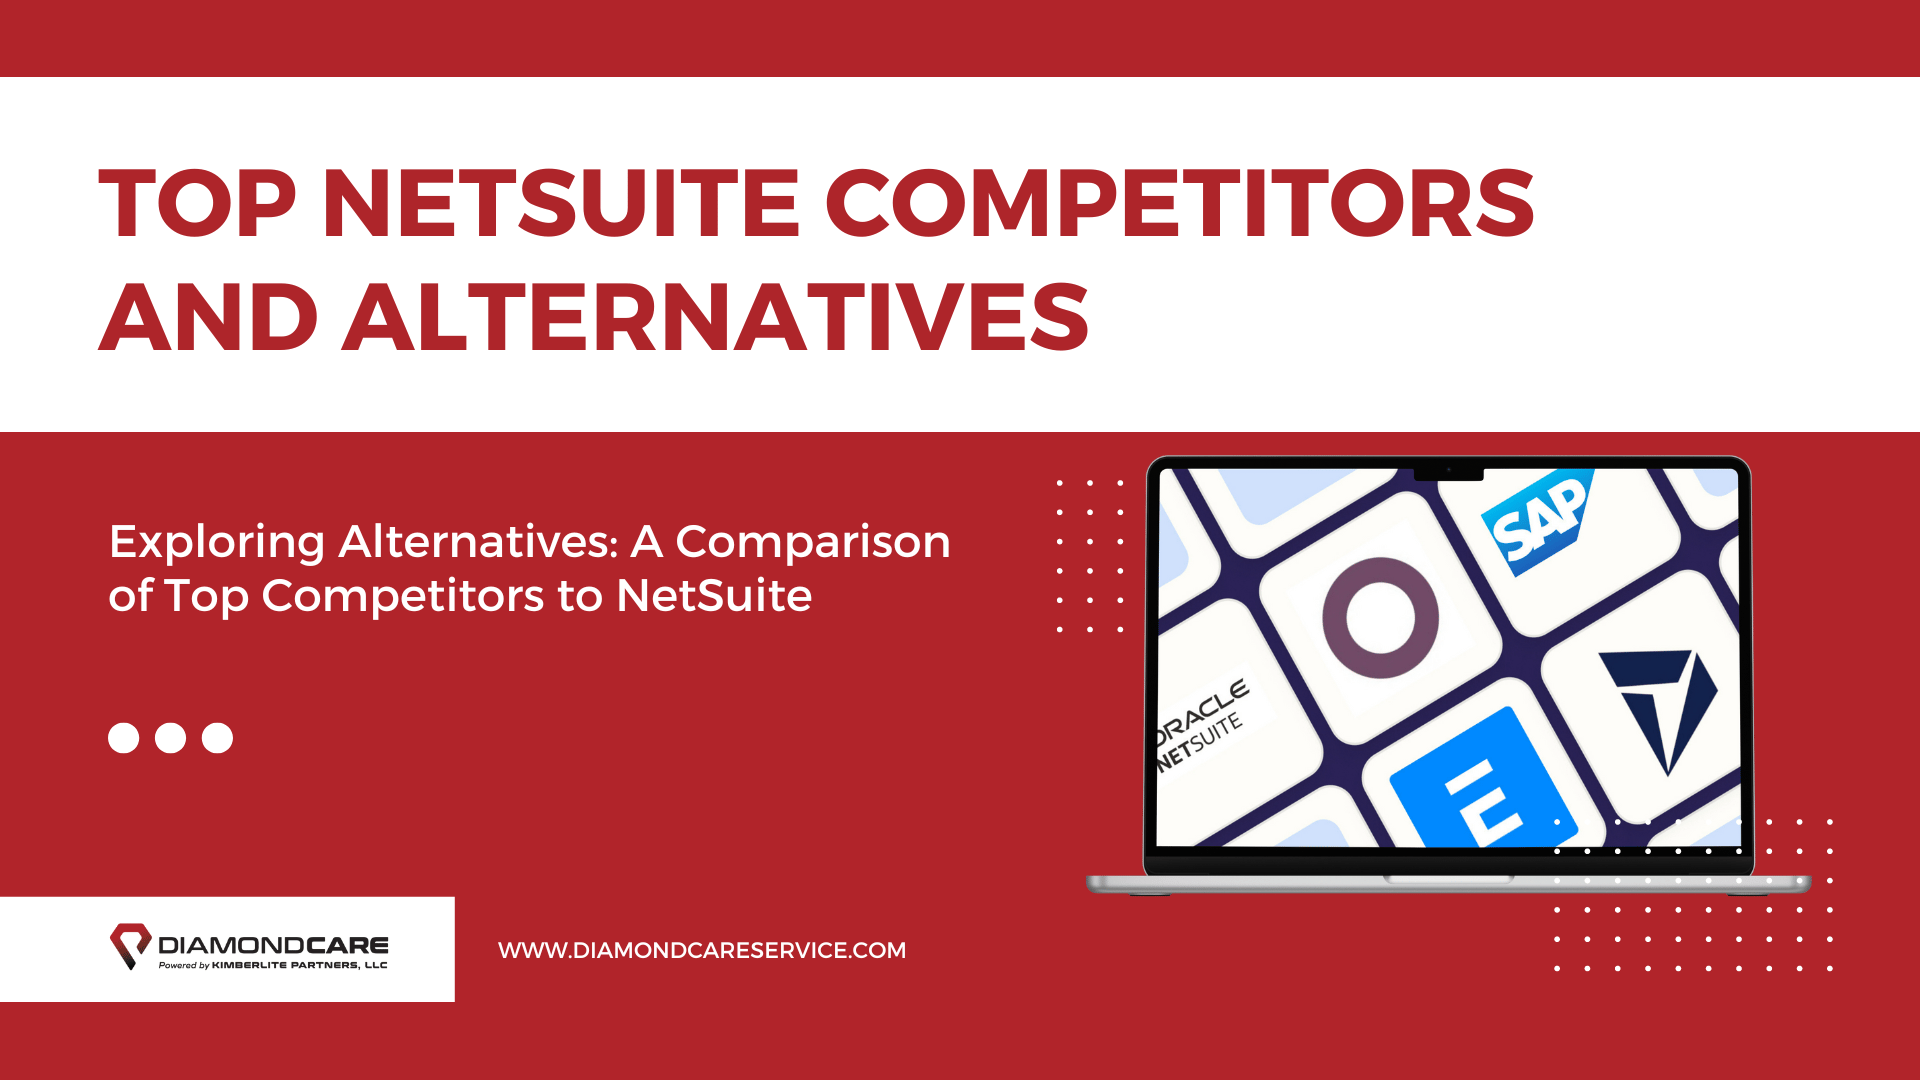 NetSuite Competitors and Alternatives